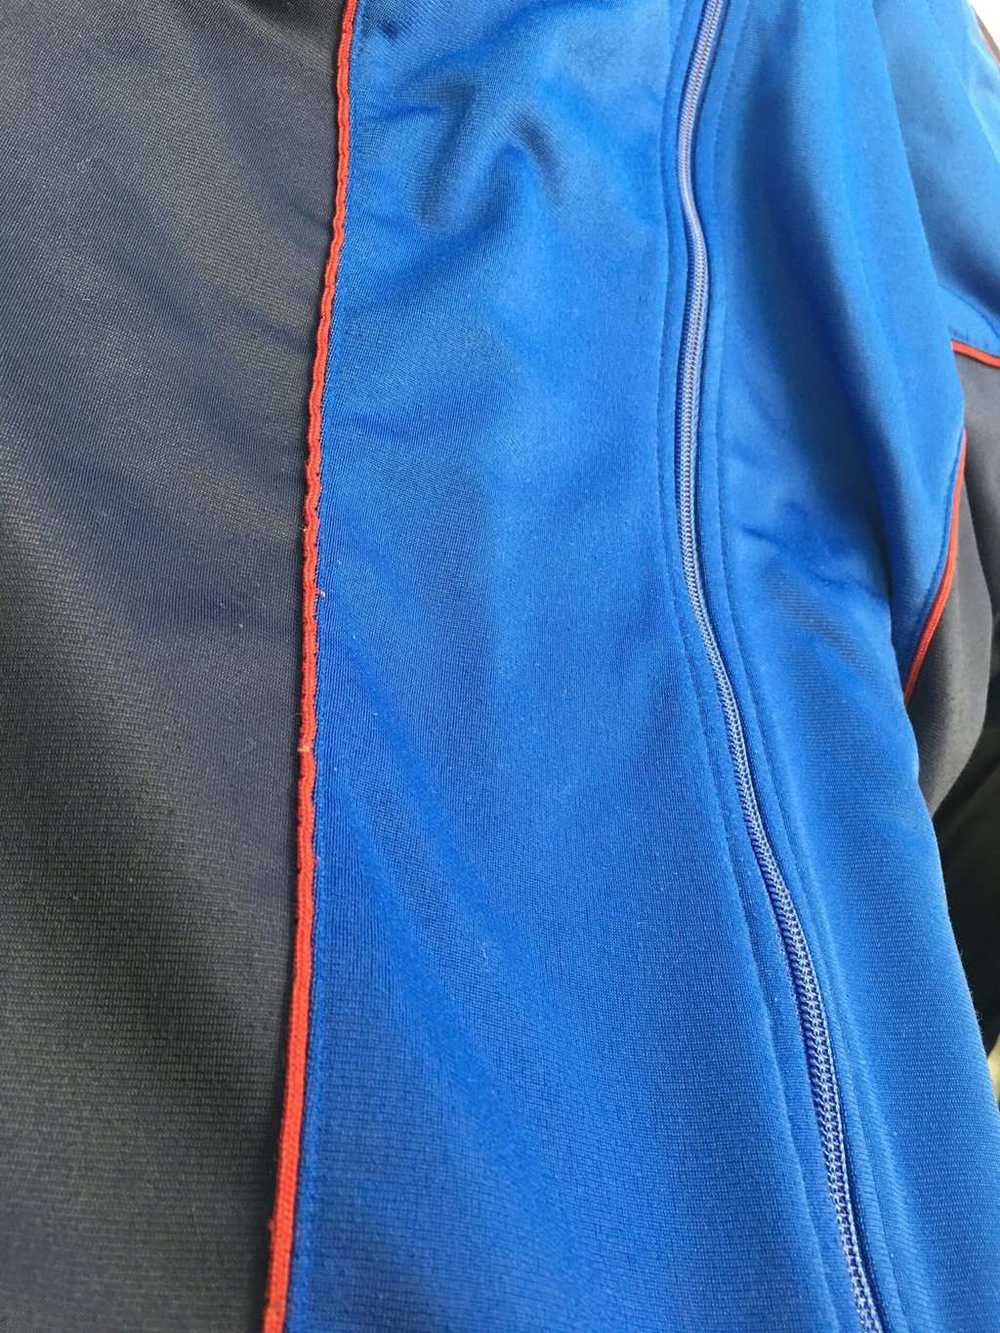 90s vintage Kappa track jacket, blue red and whit… - image 5